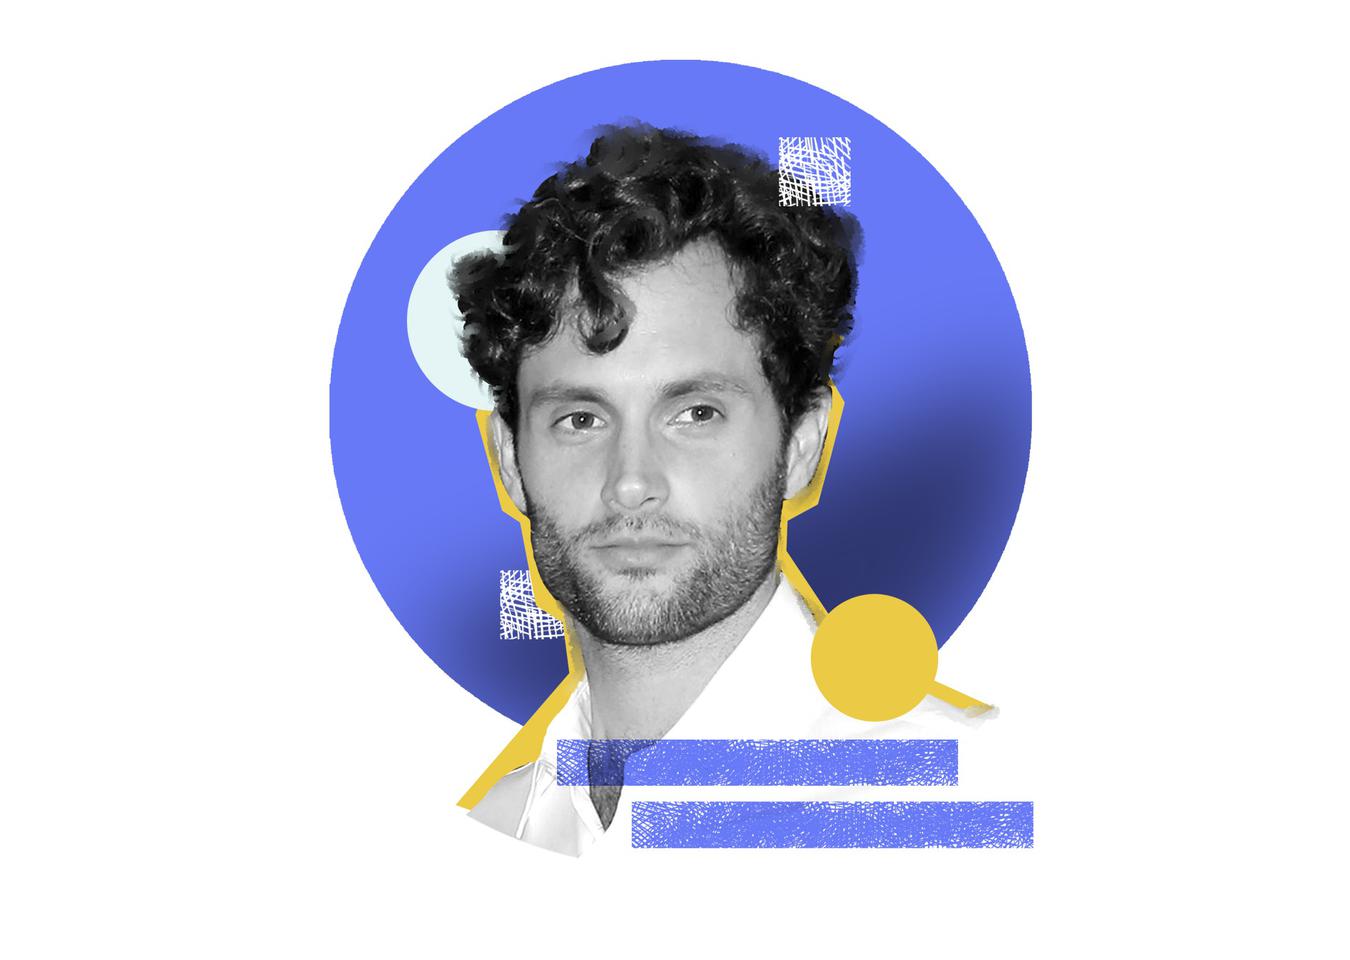 Penn Badgley's 'You' Character Has Been a Lesson in